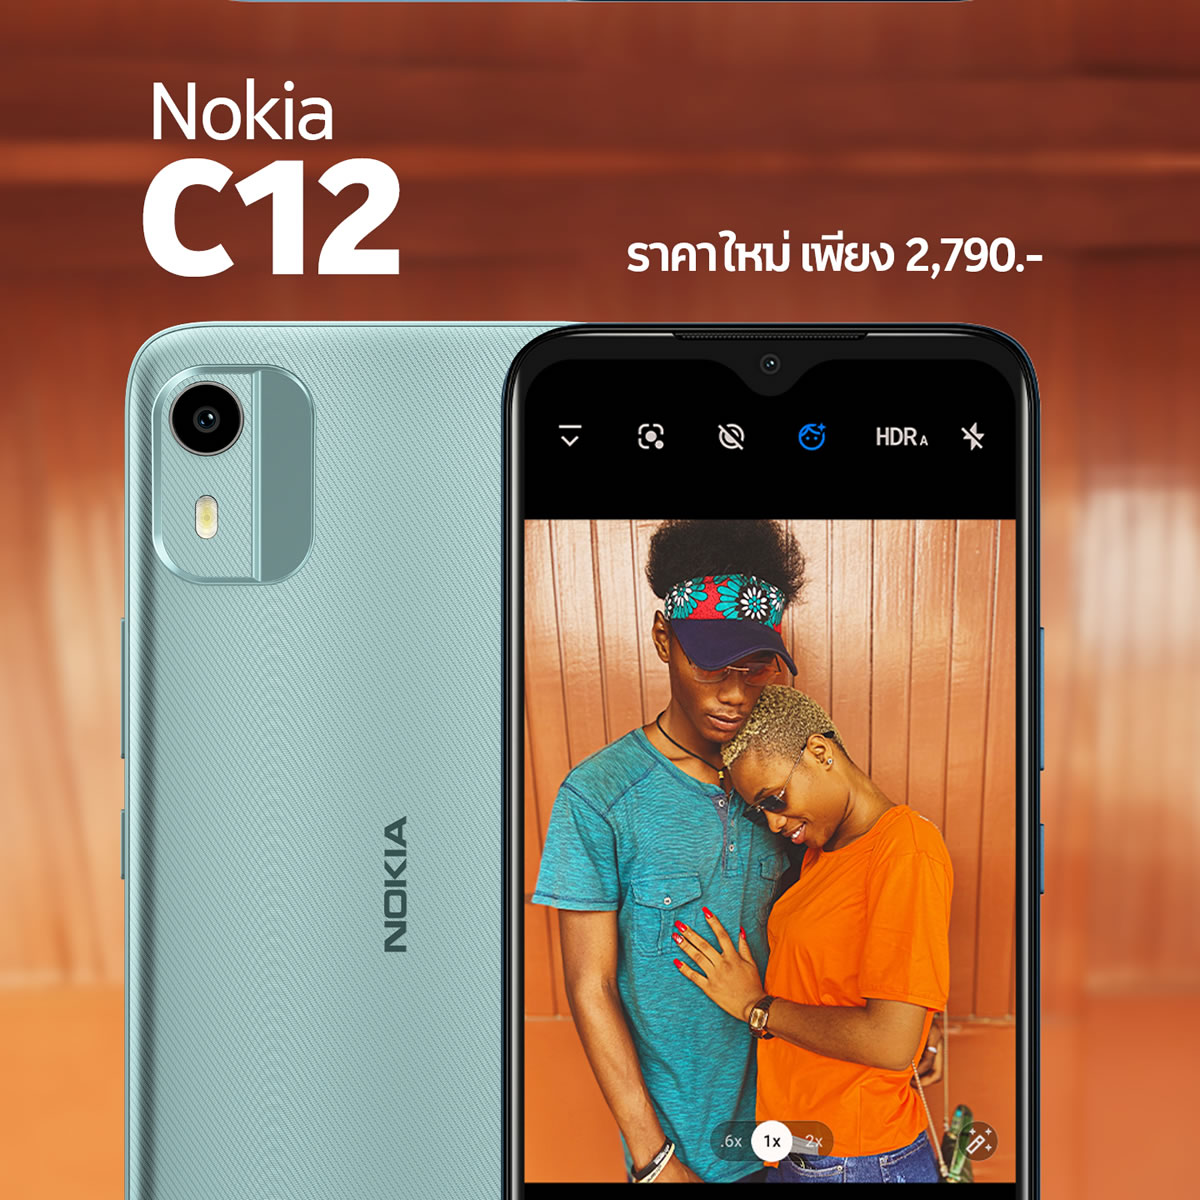 Get to know Nokia C12, a low-cost mobile phone, 6.3-inch HD+ screen, removable battery, price 2,990 baht